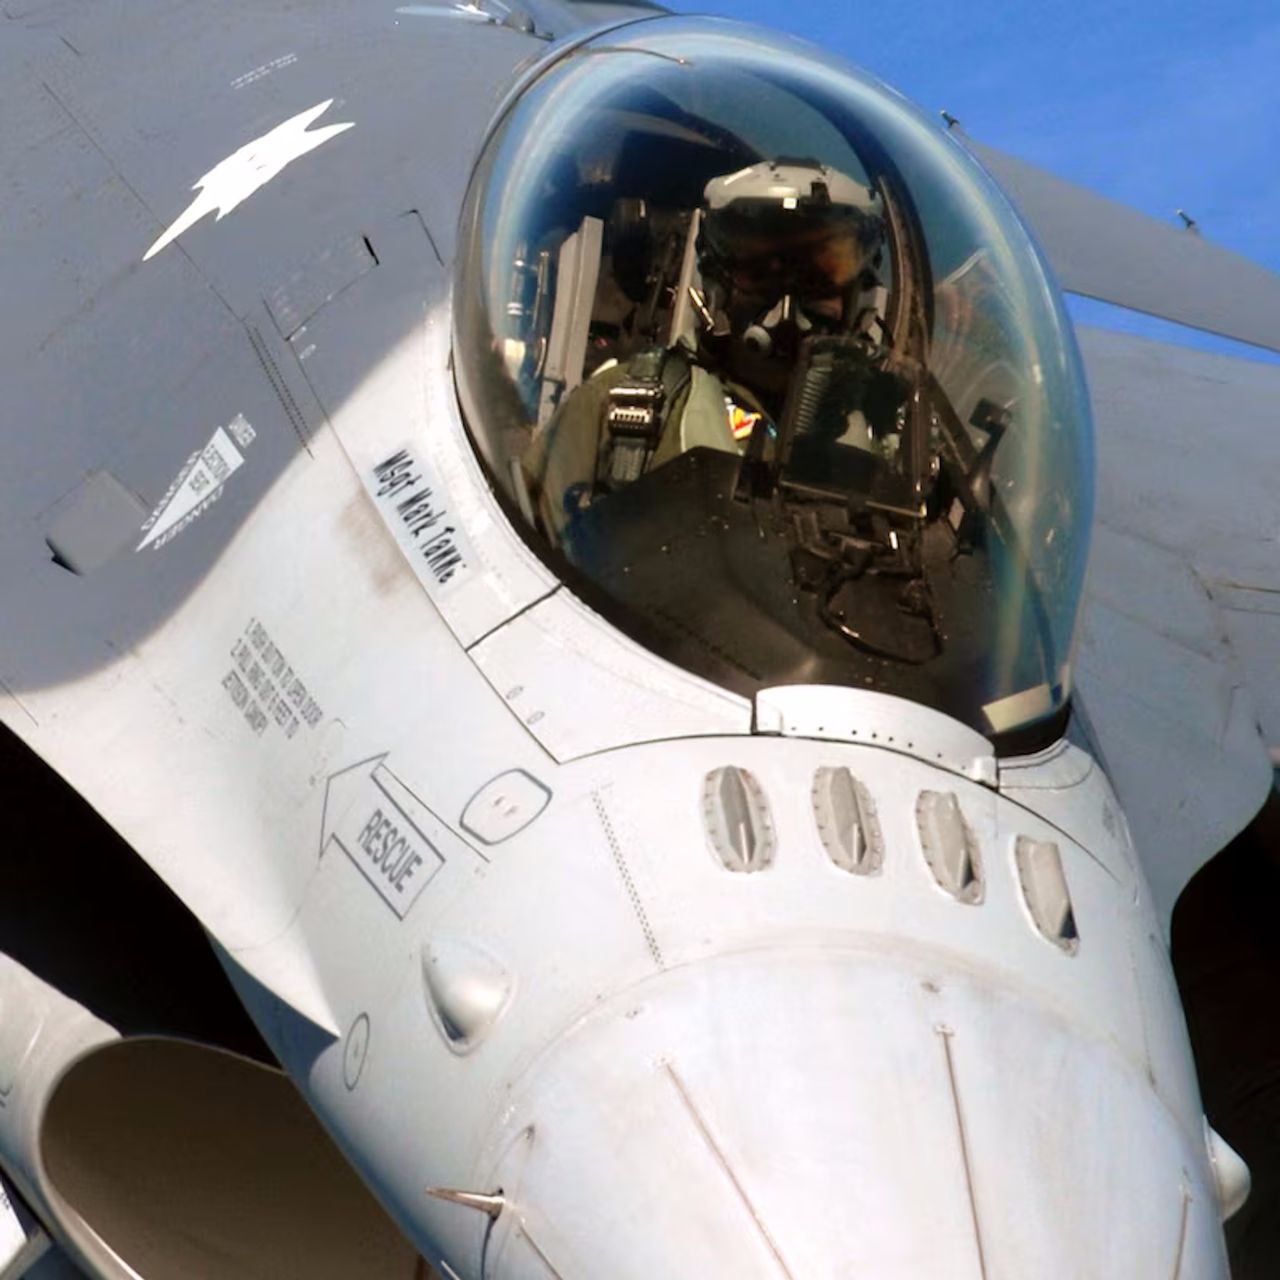 The F-16 cockpit canopy provides excellent visibility.